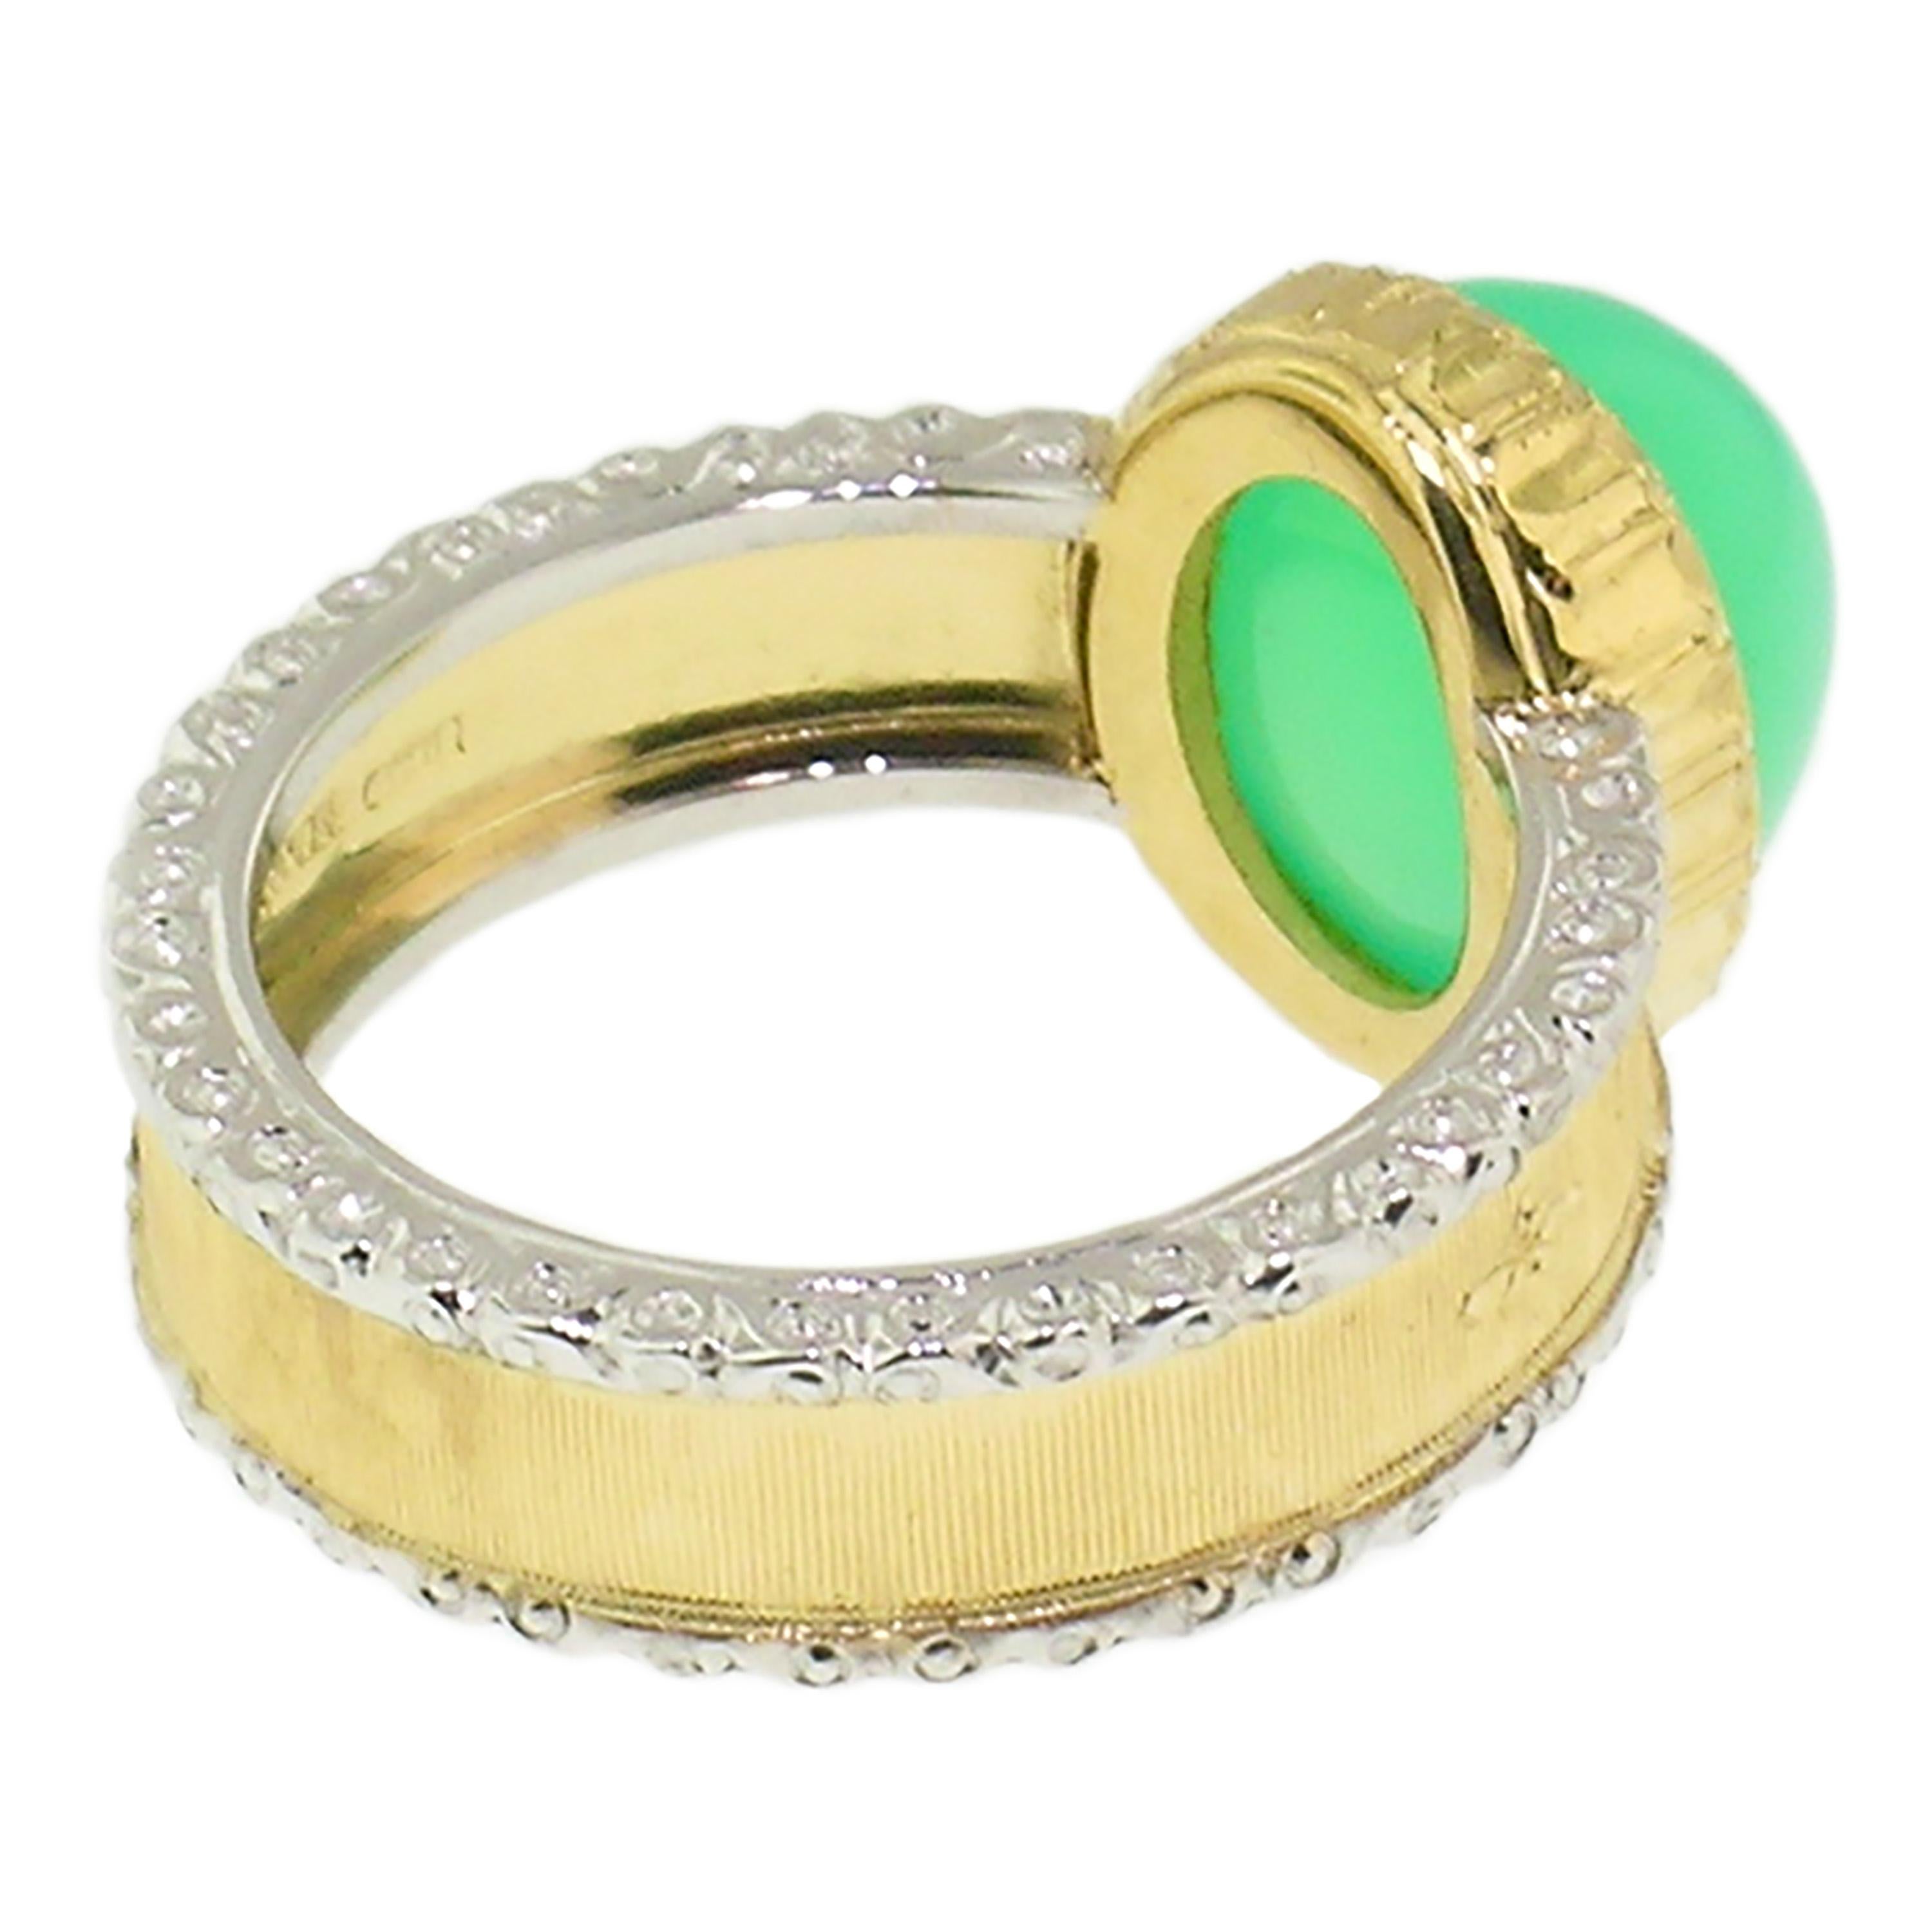 Contemporary Cynthia Scott 18kt Hand Engraved Ring with Australian Chrysoprase, Made in Italy